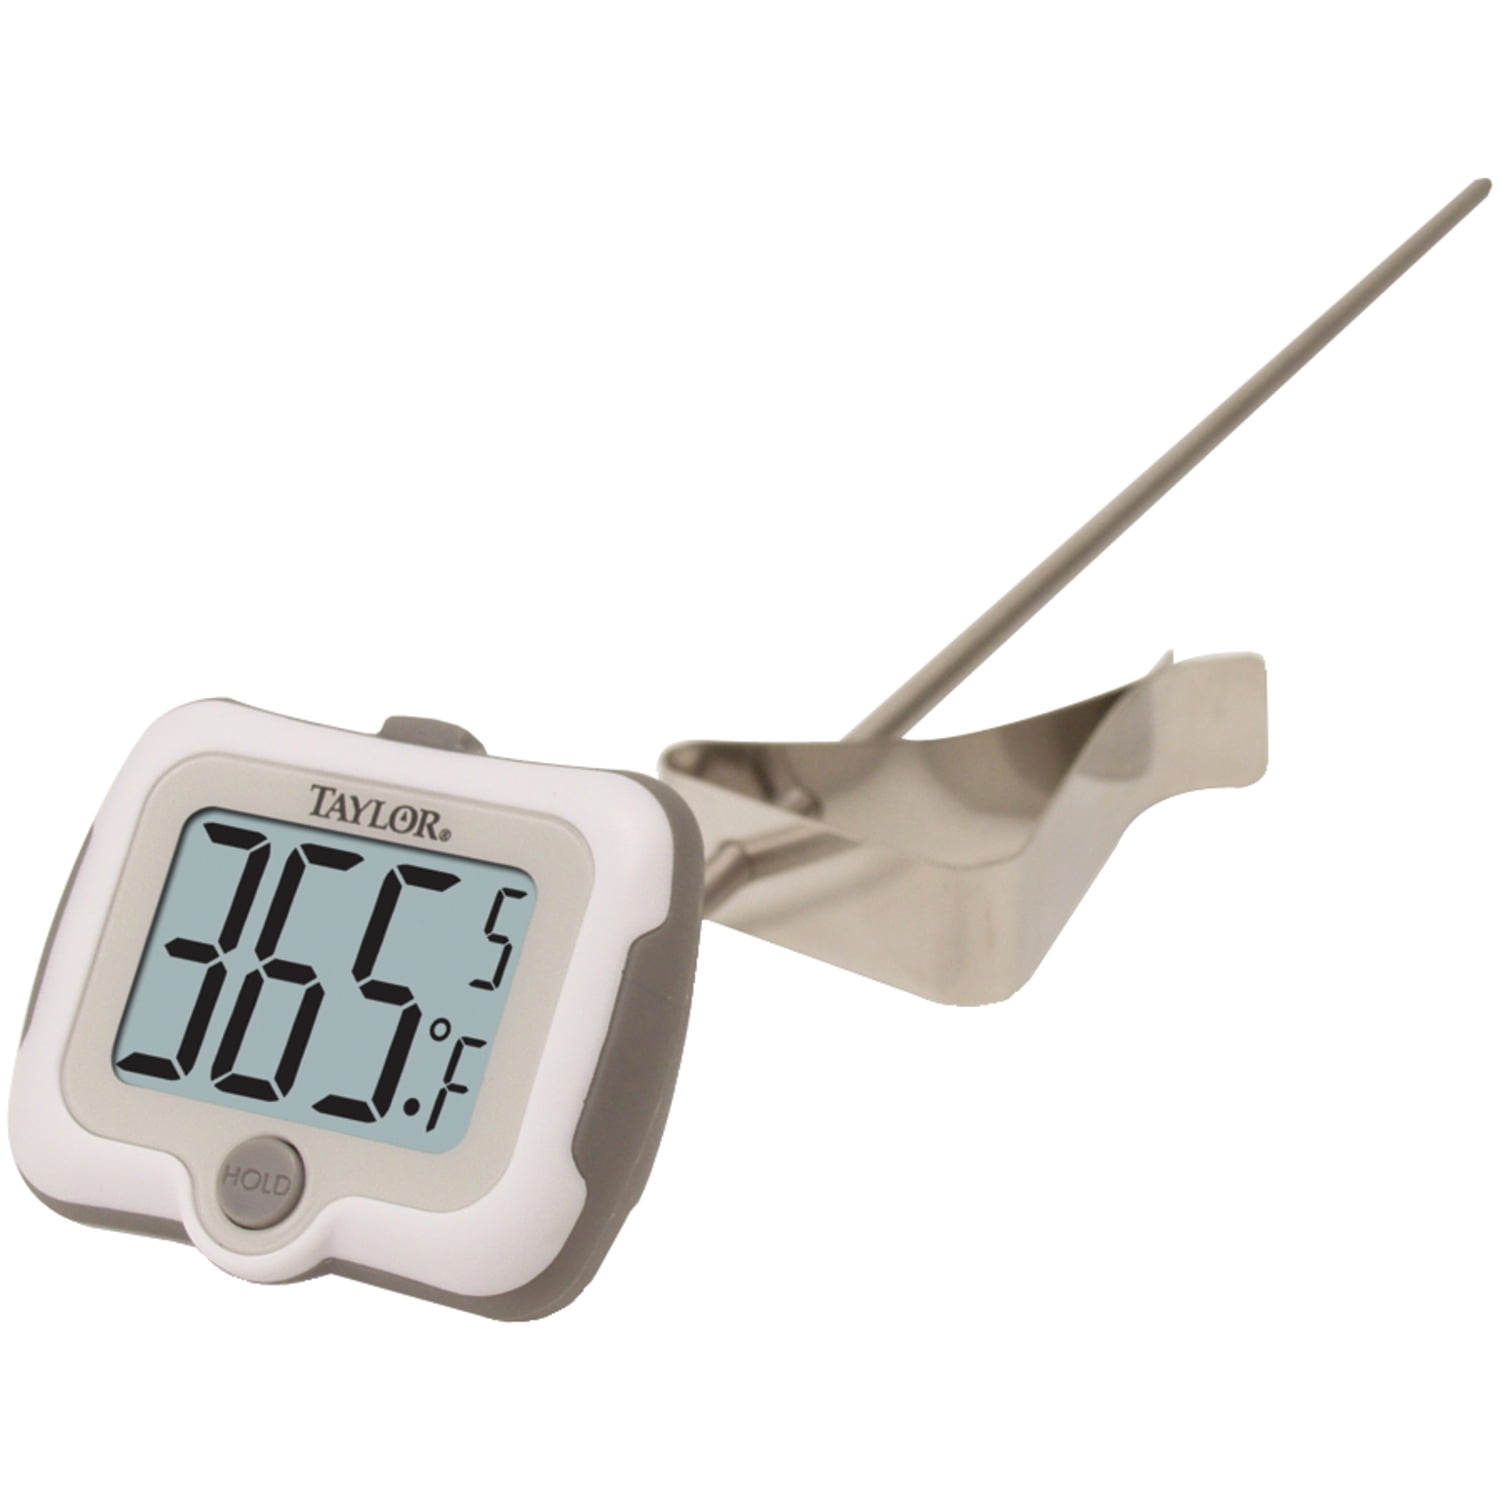 Taylor Precision Products Classic Digital Candy/Deep Fry Thermometer 